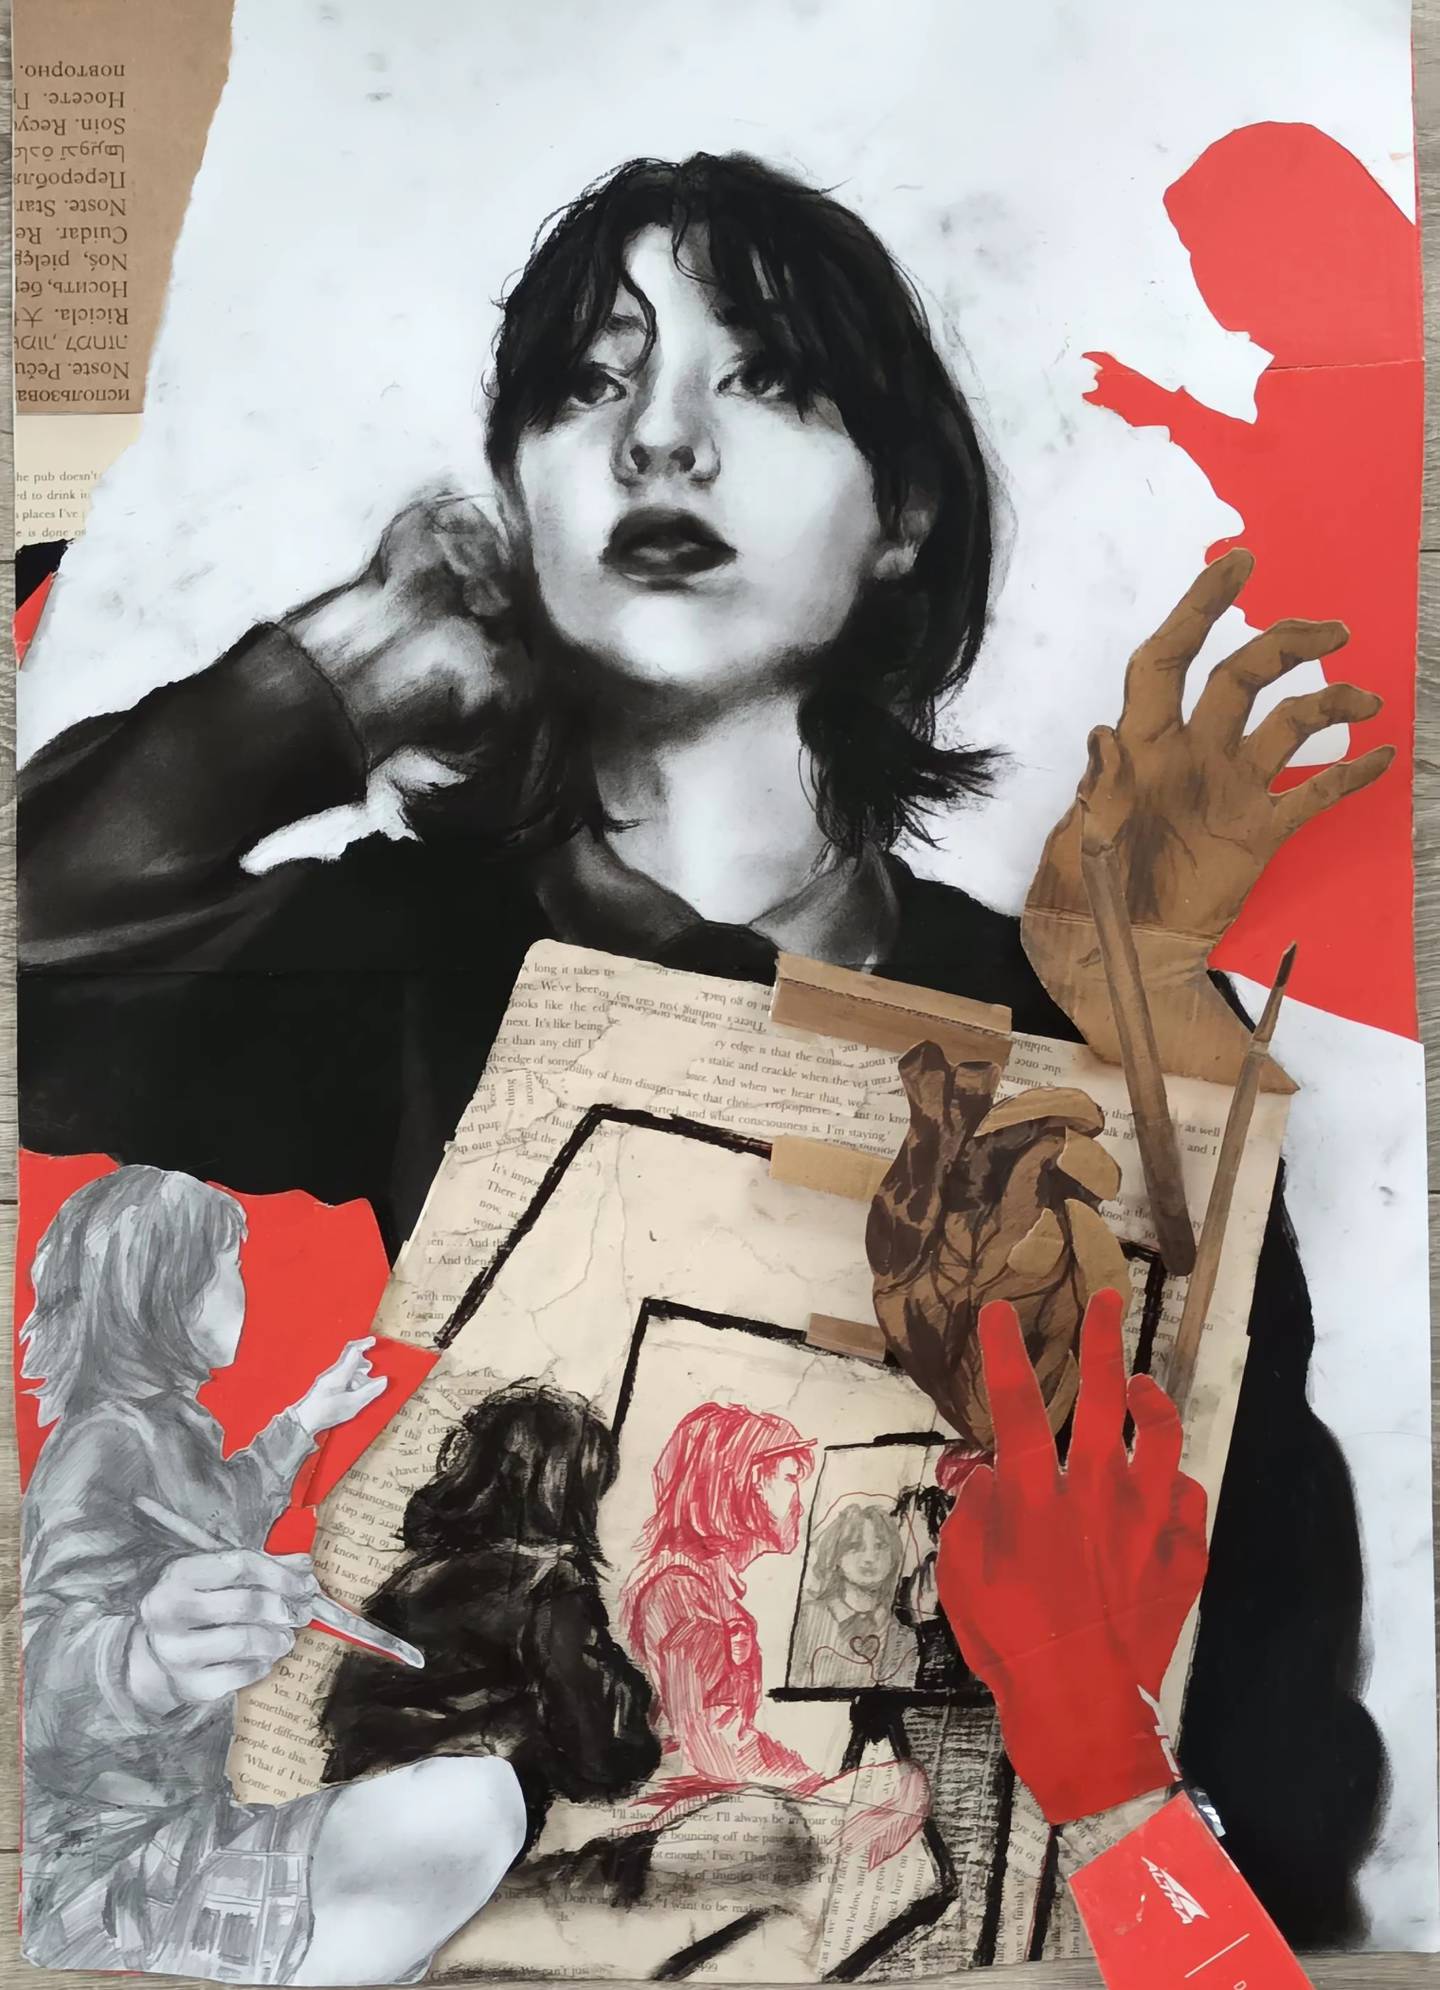 Maya Ryan (Sligo), Reach for me, pencil, charcoal, pen, book pages, paper bags & collage, cardboard on paper